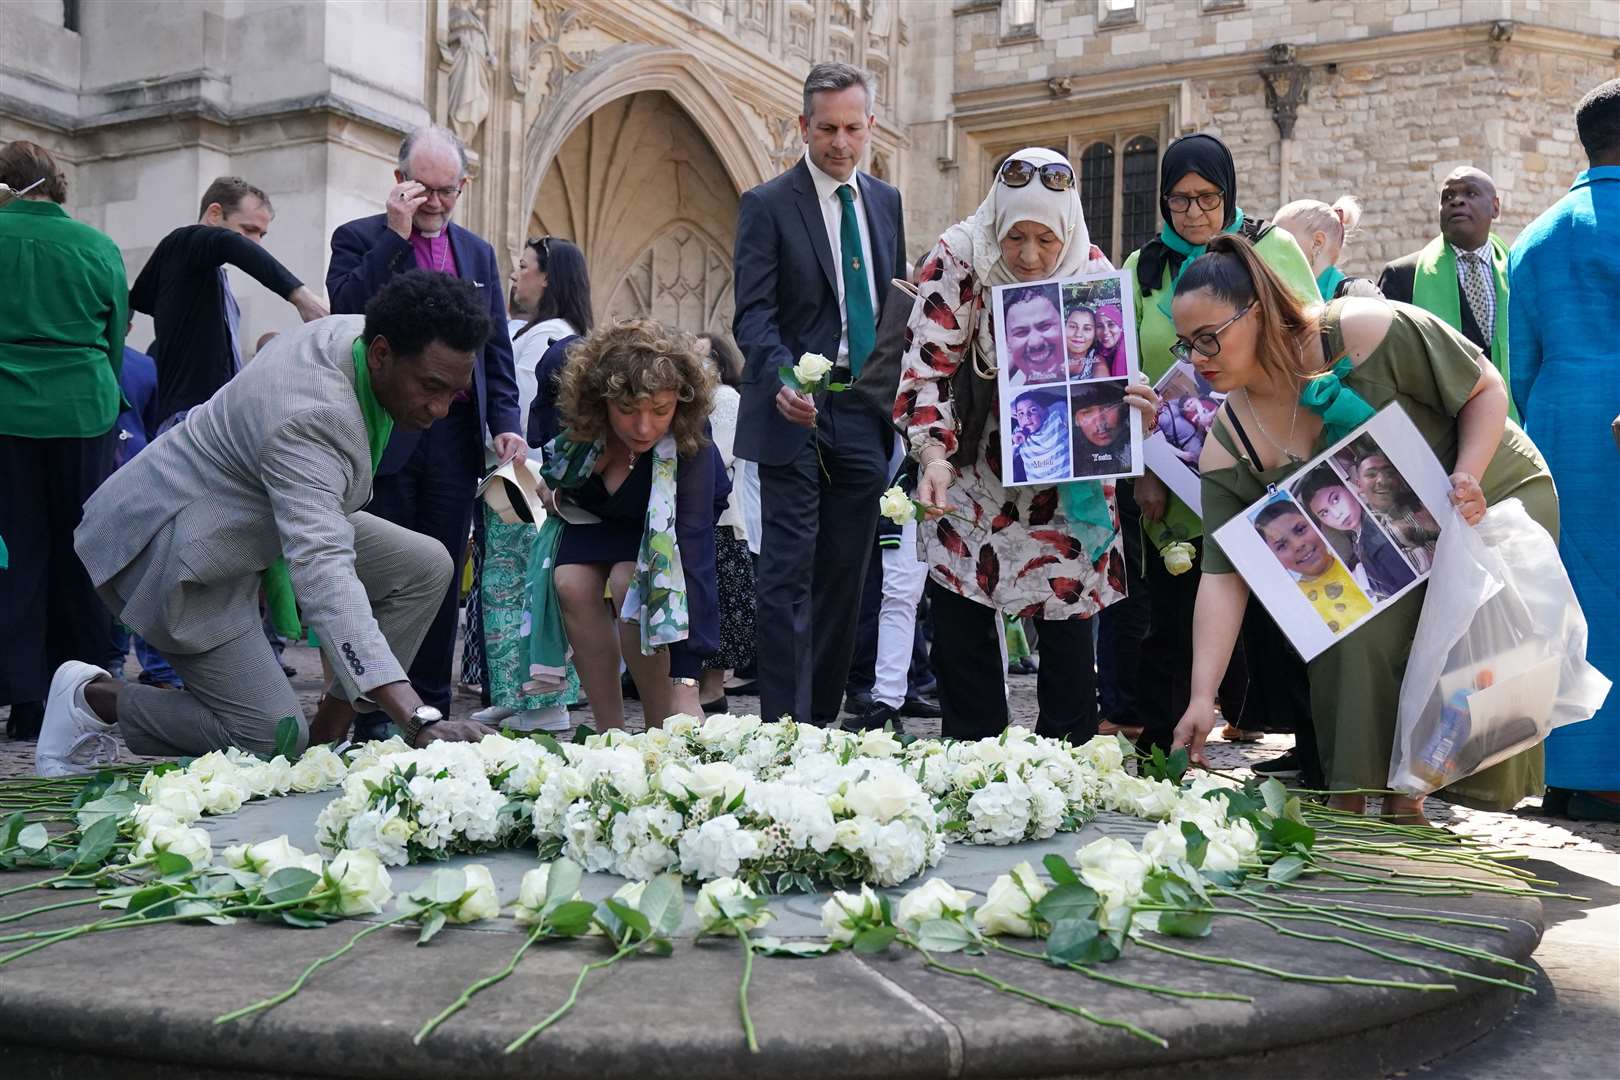 Outside the abbey, people placed white roses in memory of the victims (Jonathan Brady/PA)